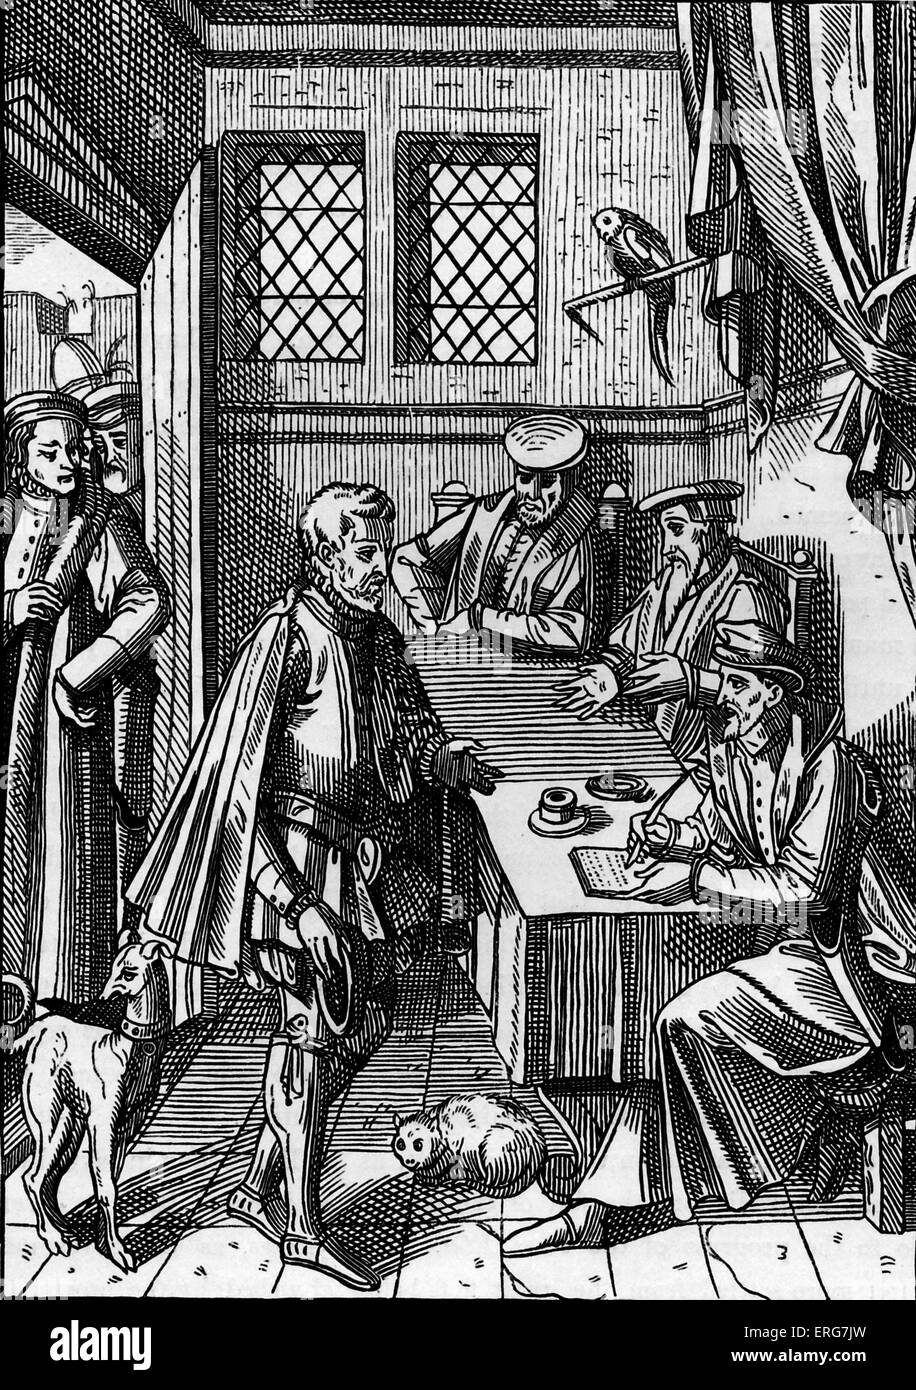 Bailliage or tribunal of the King 's bailiff, 1557. Facsimile of an engraving on wood in the work of Josse Damhoudere, 'Praxis Stock Photo